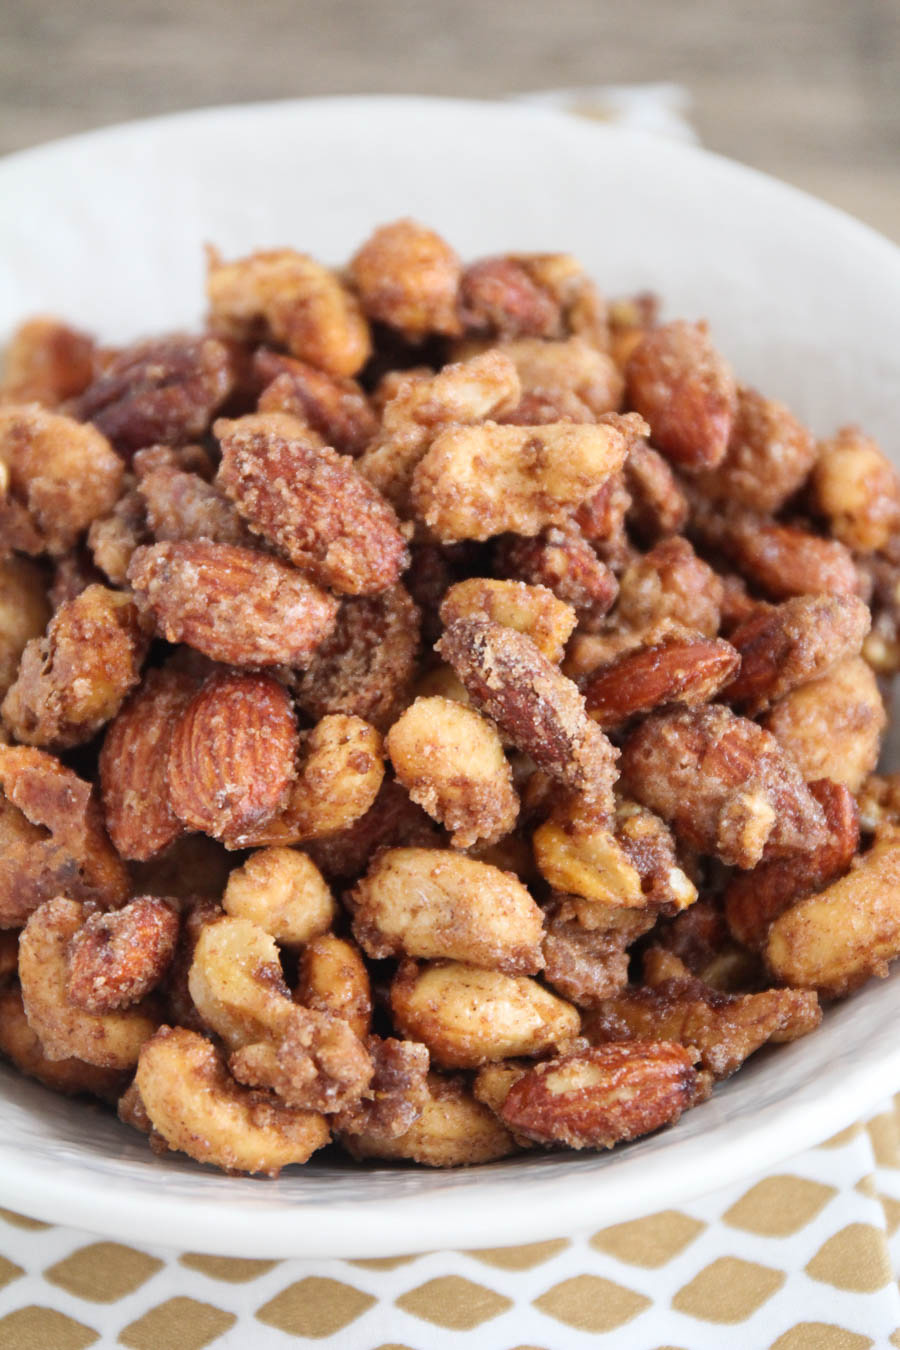 These candied mixed nuts are totally addicting and insanely delicious! They have the perfect blend of flavors and are so sweet and crisp!